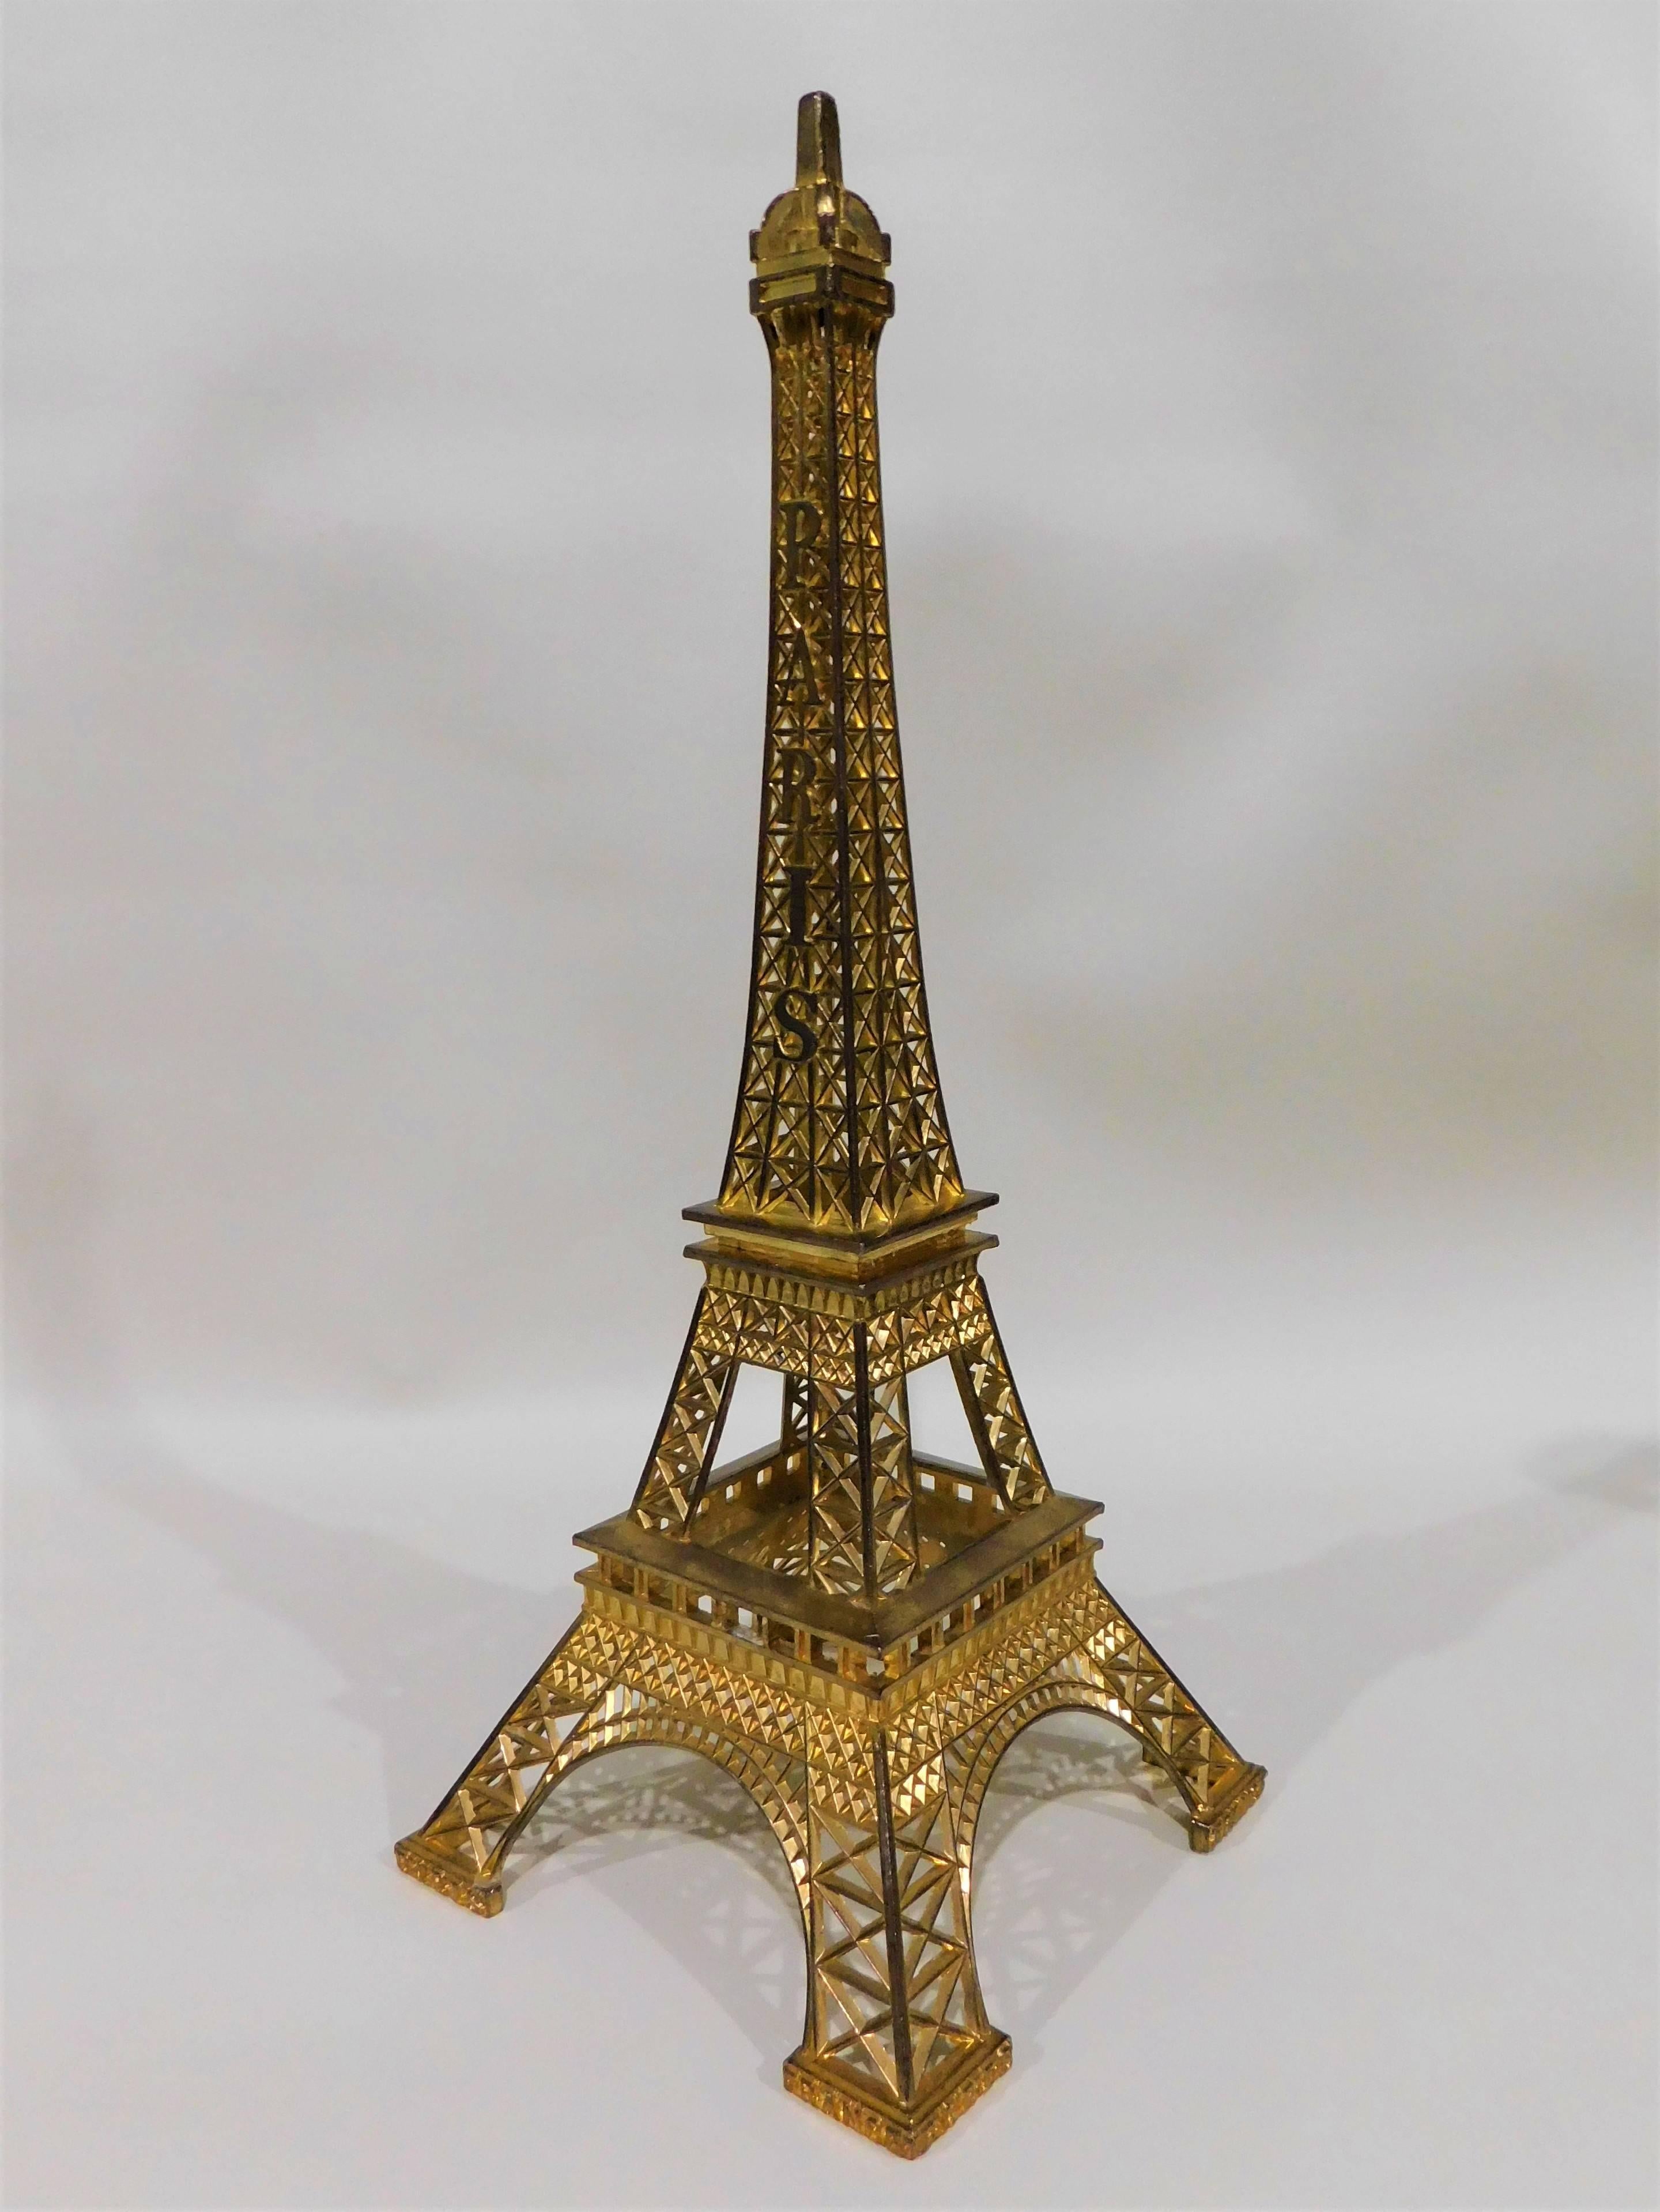 Eiffel Tower Paris France with gilt metal display stand model souvenir. Nice architectural copy.

Eiffel tower (French: La Tour Eiffel) was built in 1889 and is located on the Champ de Mars in Paris, France. Hollow structure tower, 300 meters